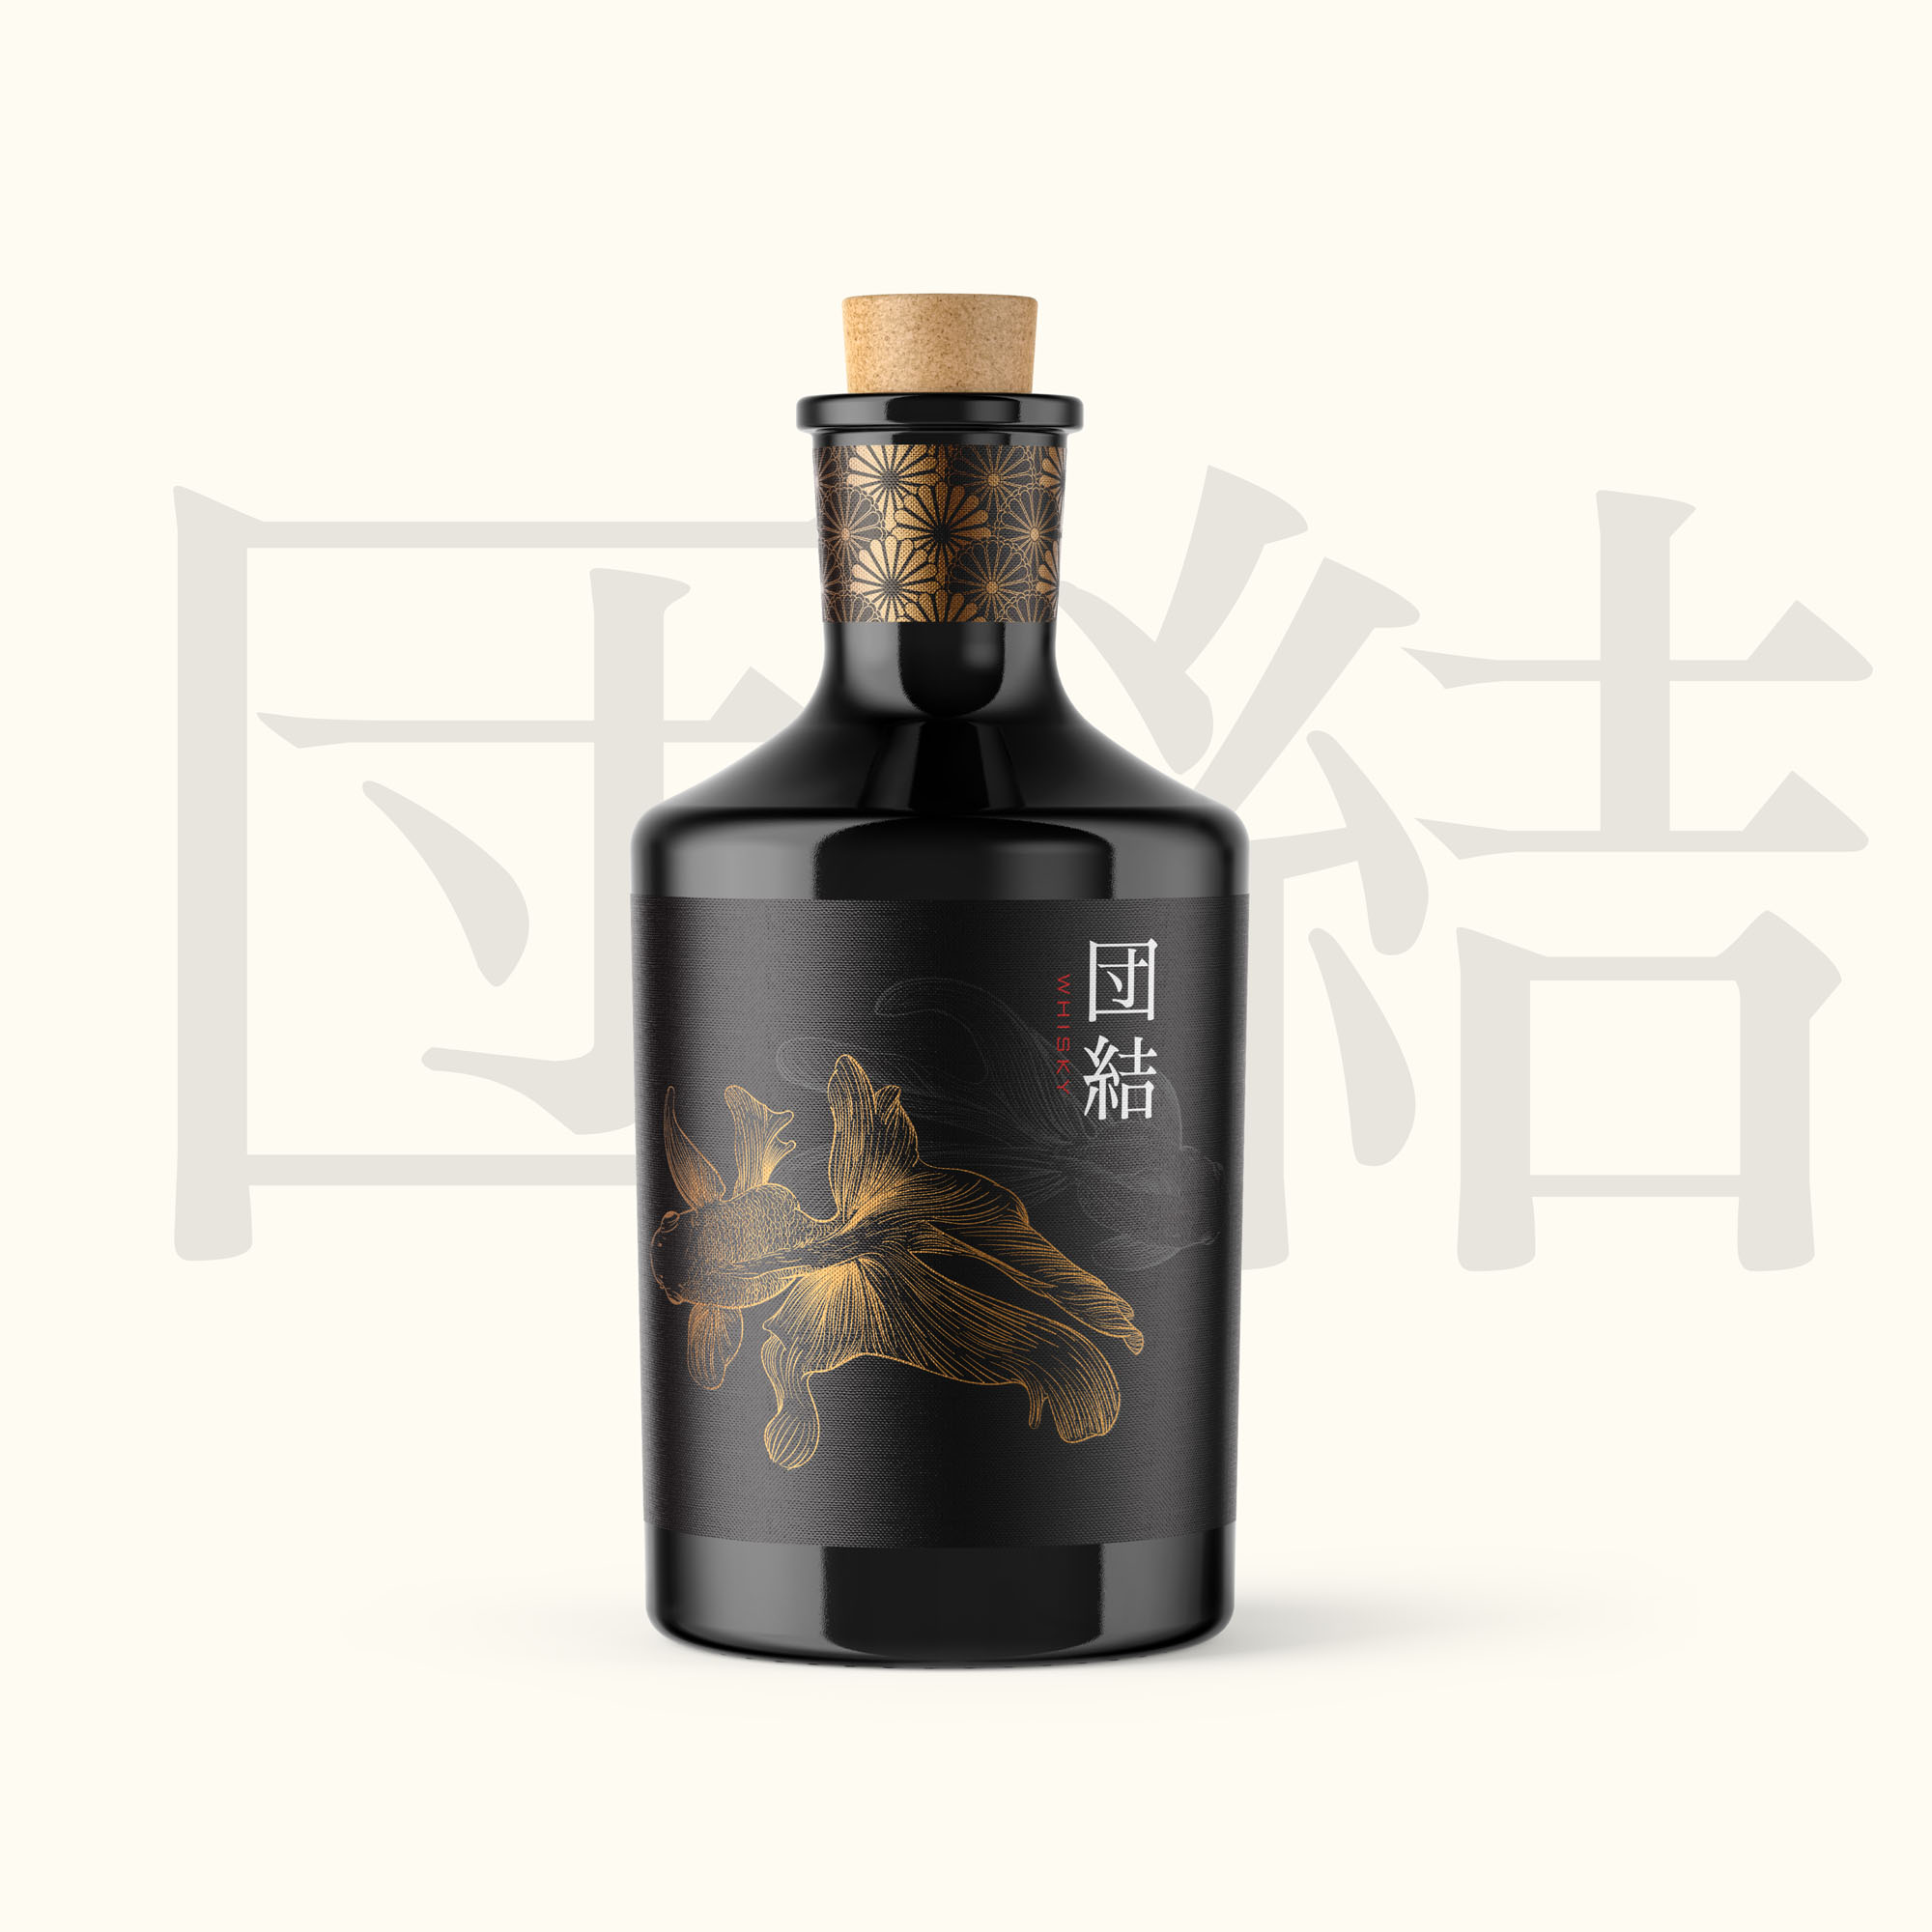 Concept Brand and Packaging Design for Global Whiskey